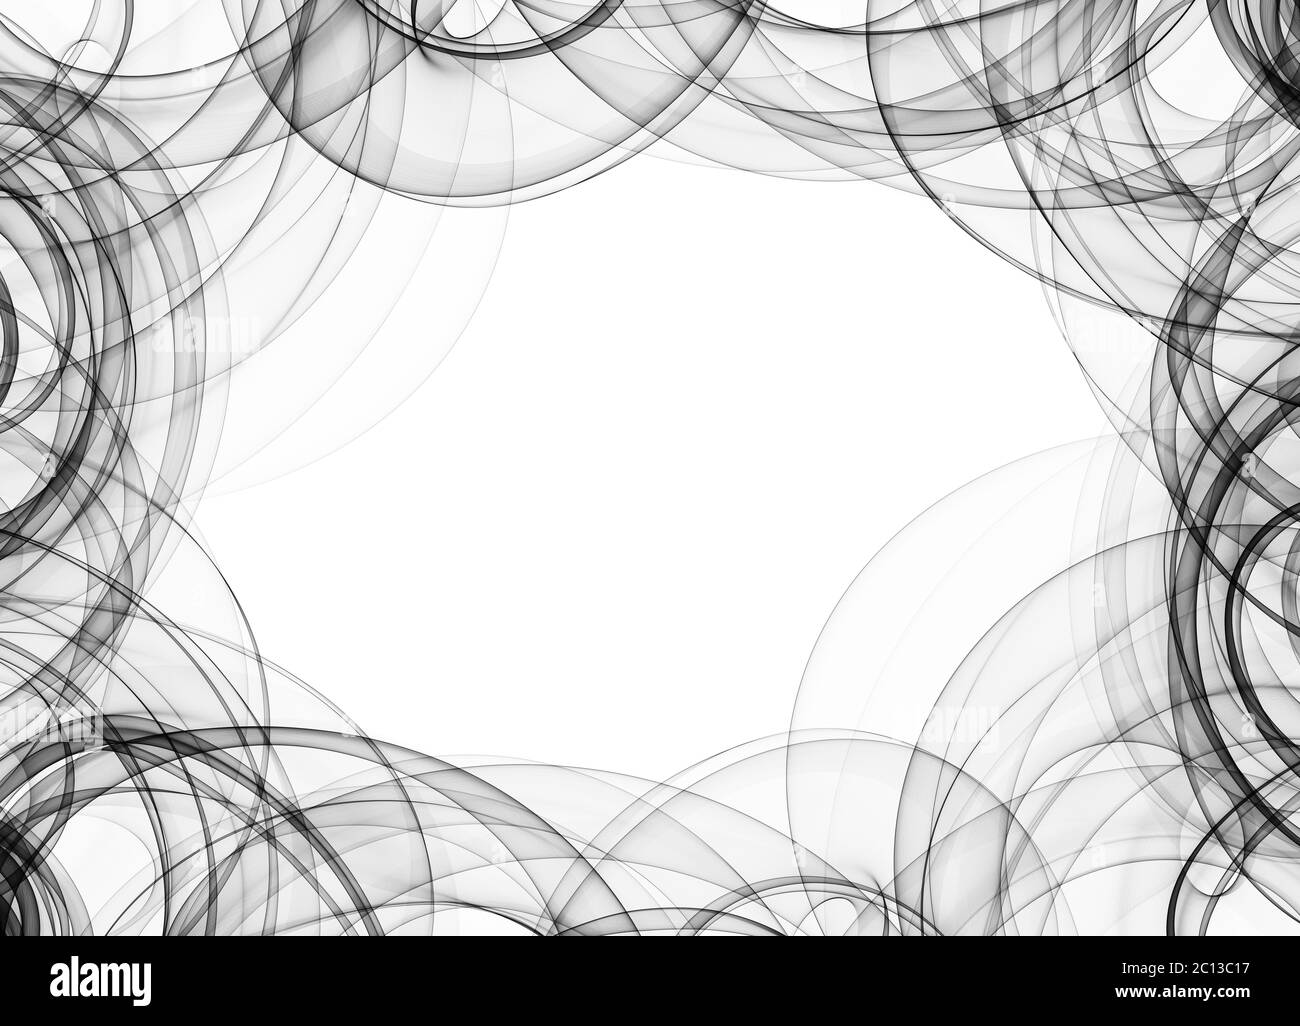 abstract black flame smoke frame over white background with copyspace for your text and design Stock Photo